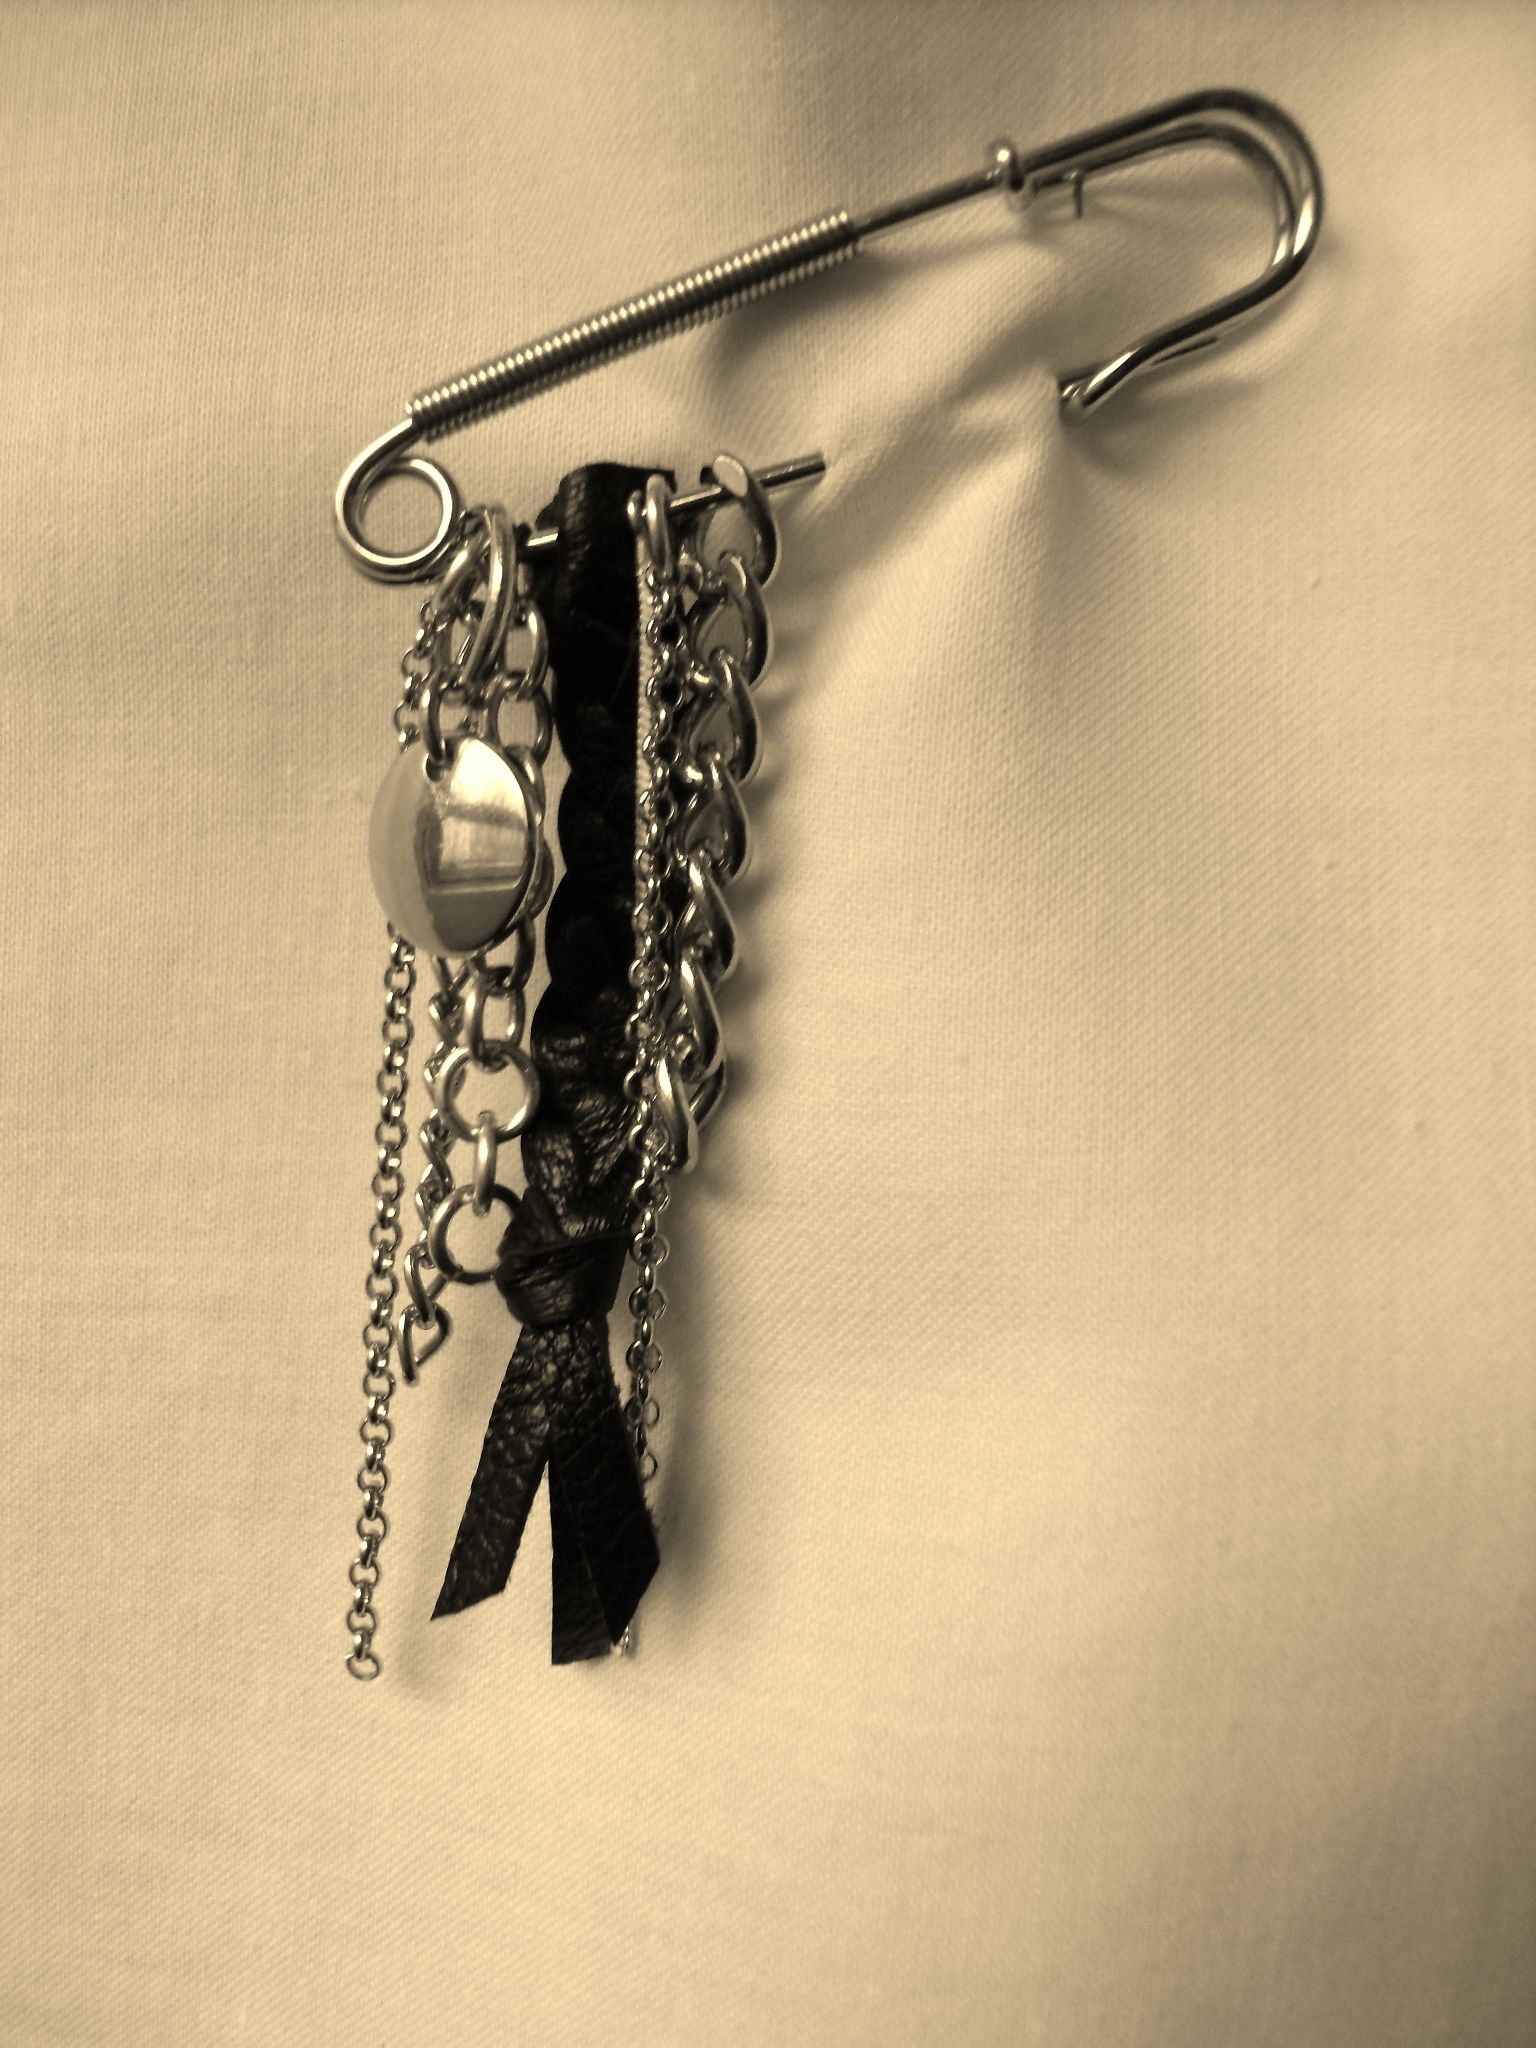 Metallic pin with leather and chains (recycled materials). | Bits ...